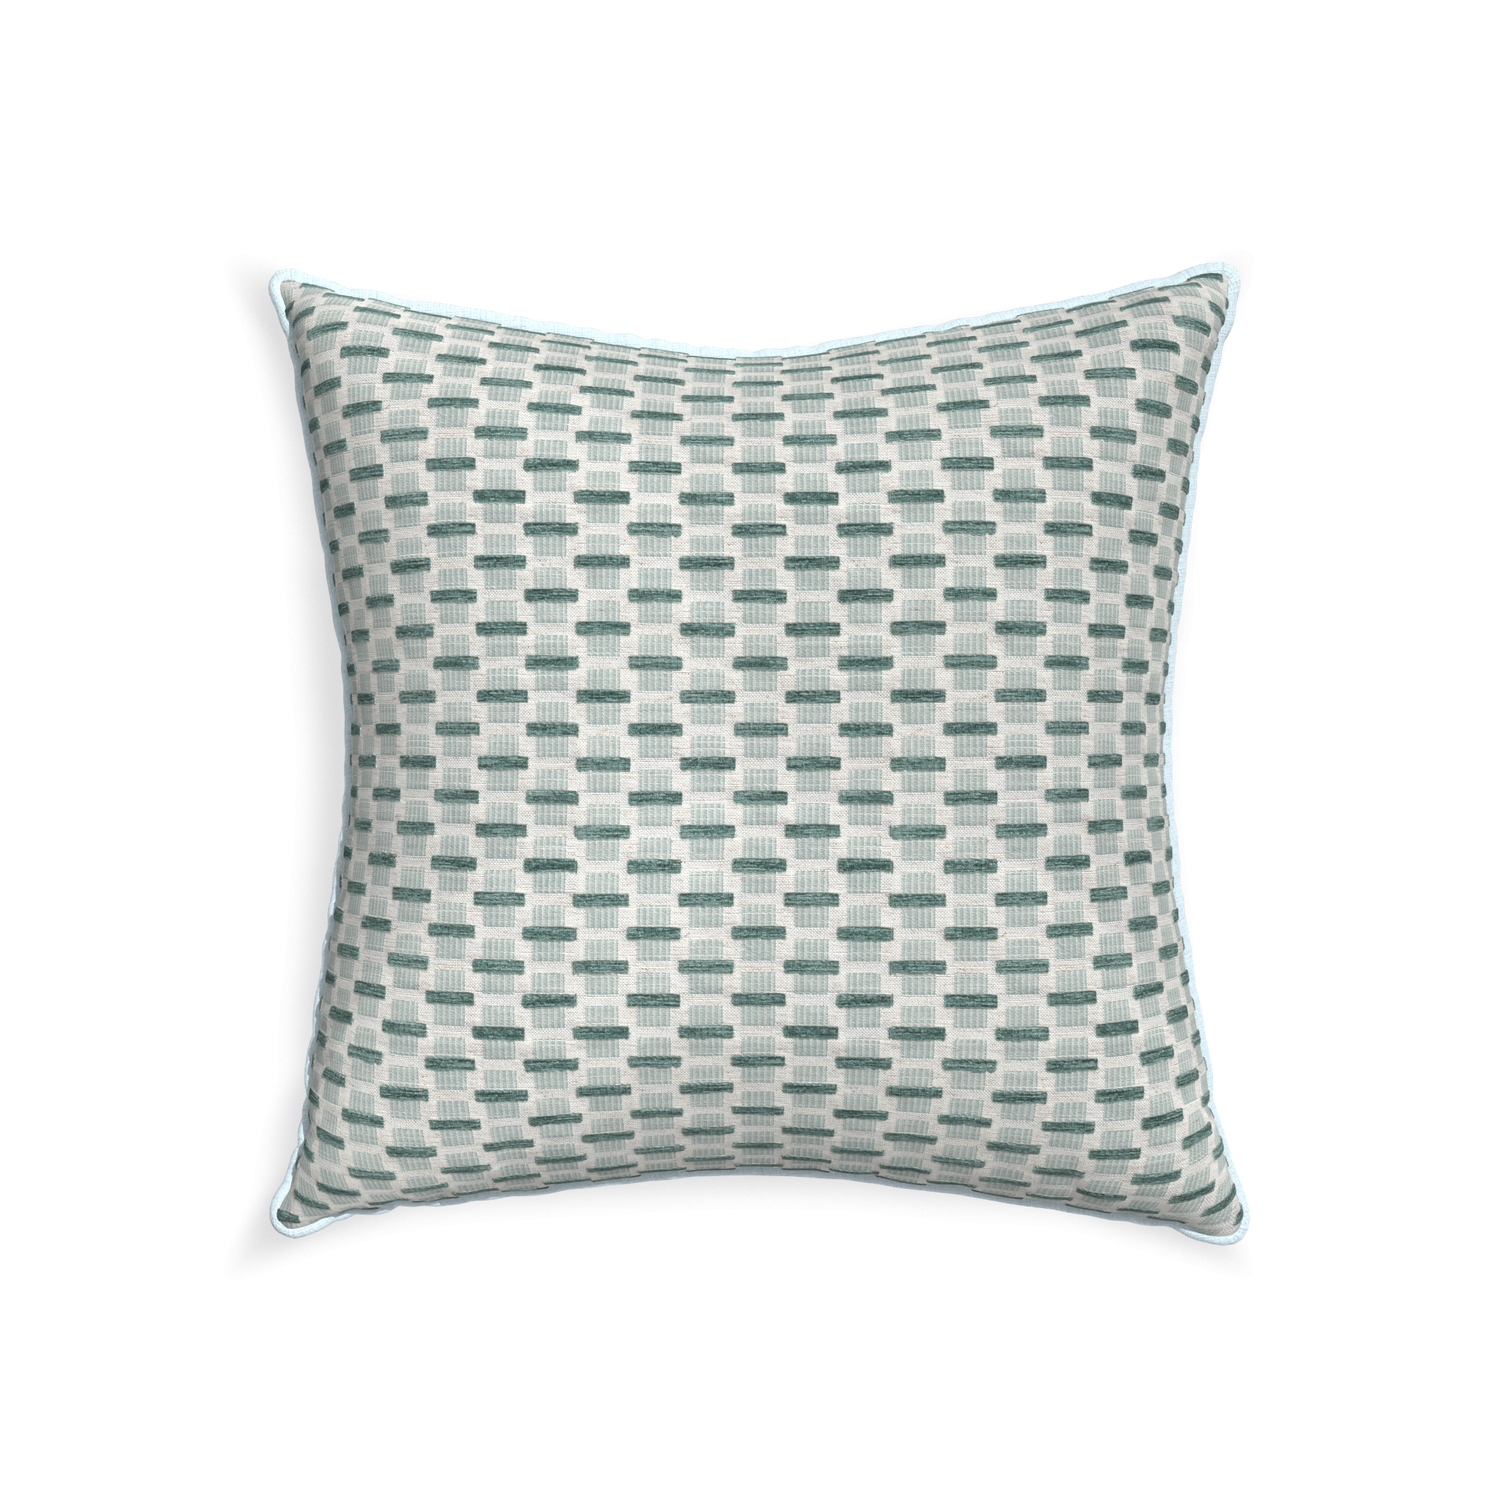 22-square willow mint custom green geometric chenillepillow with powder piping on white background